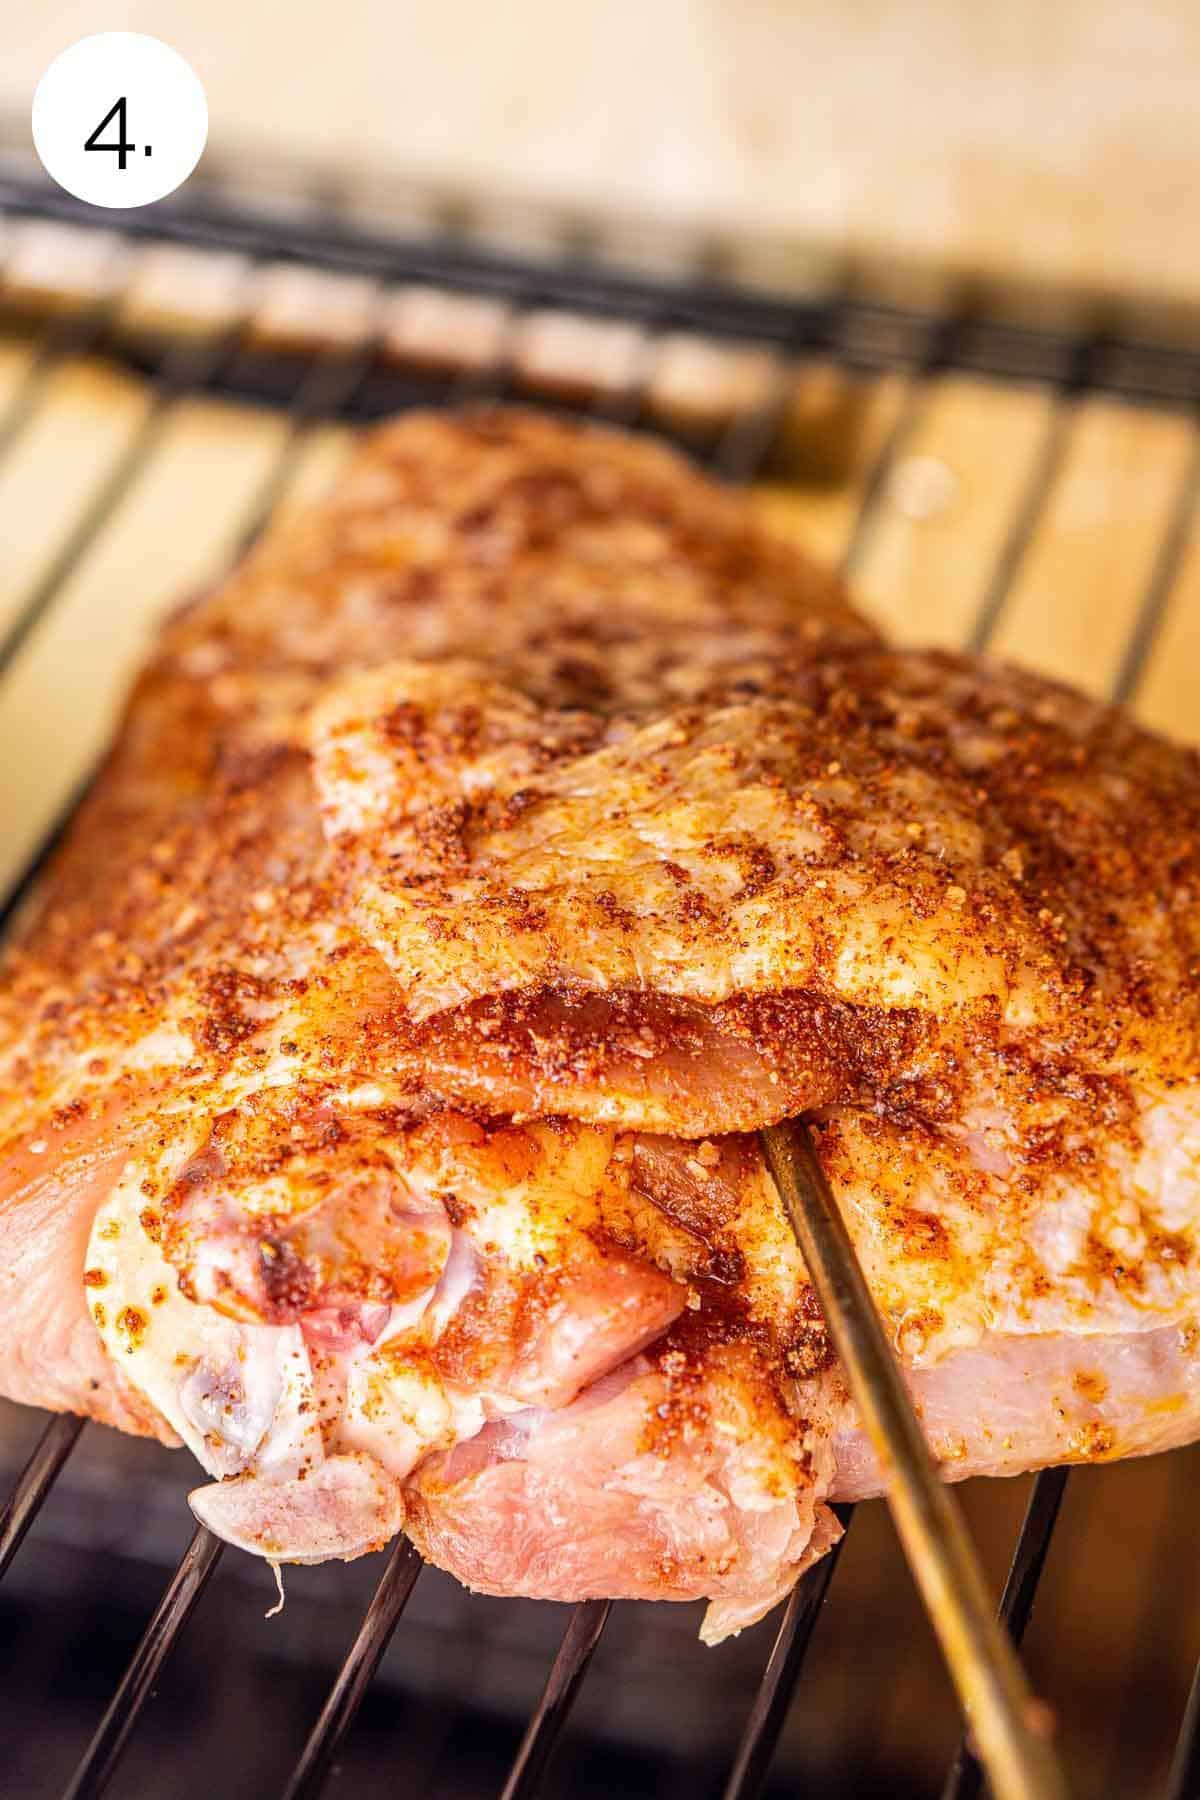 The turkey on the grill grates with a leave-in meat thermometer inserted into the meat.